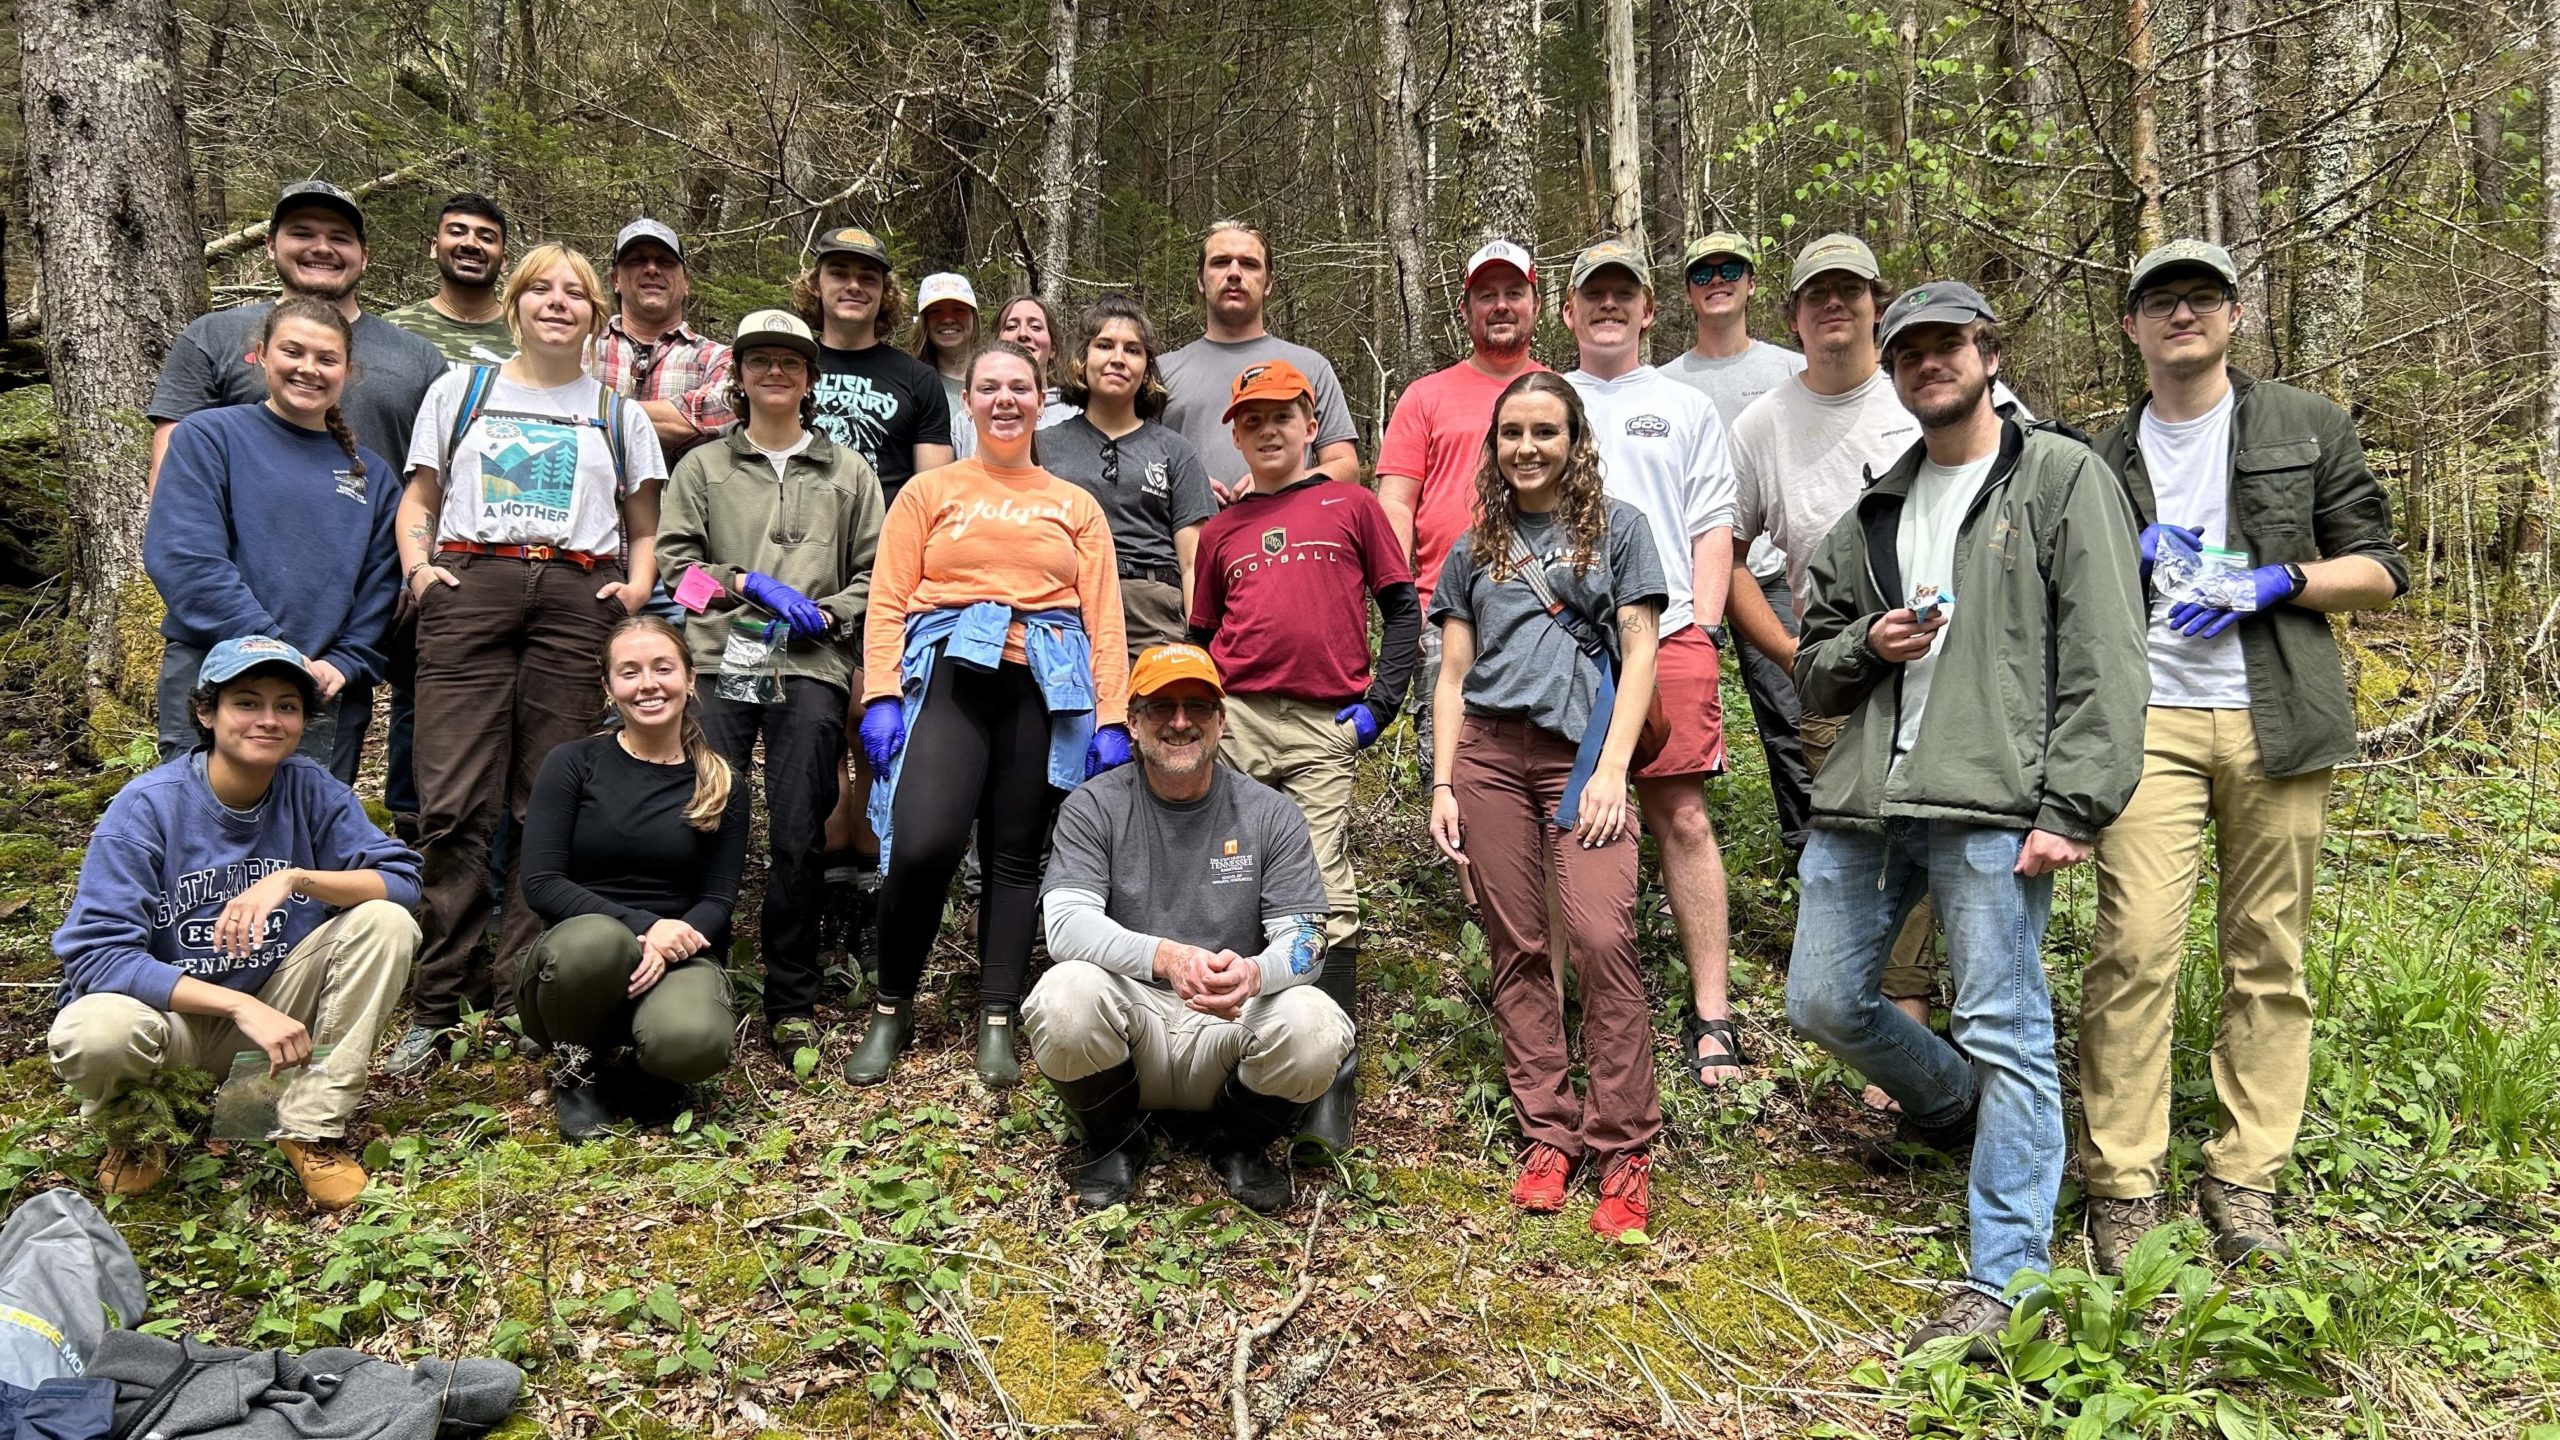 The amphibian ecology and conservation class in the University of Tennessee School of Natural Resources